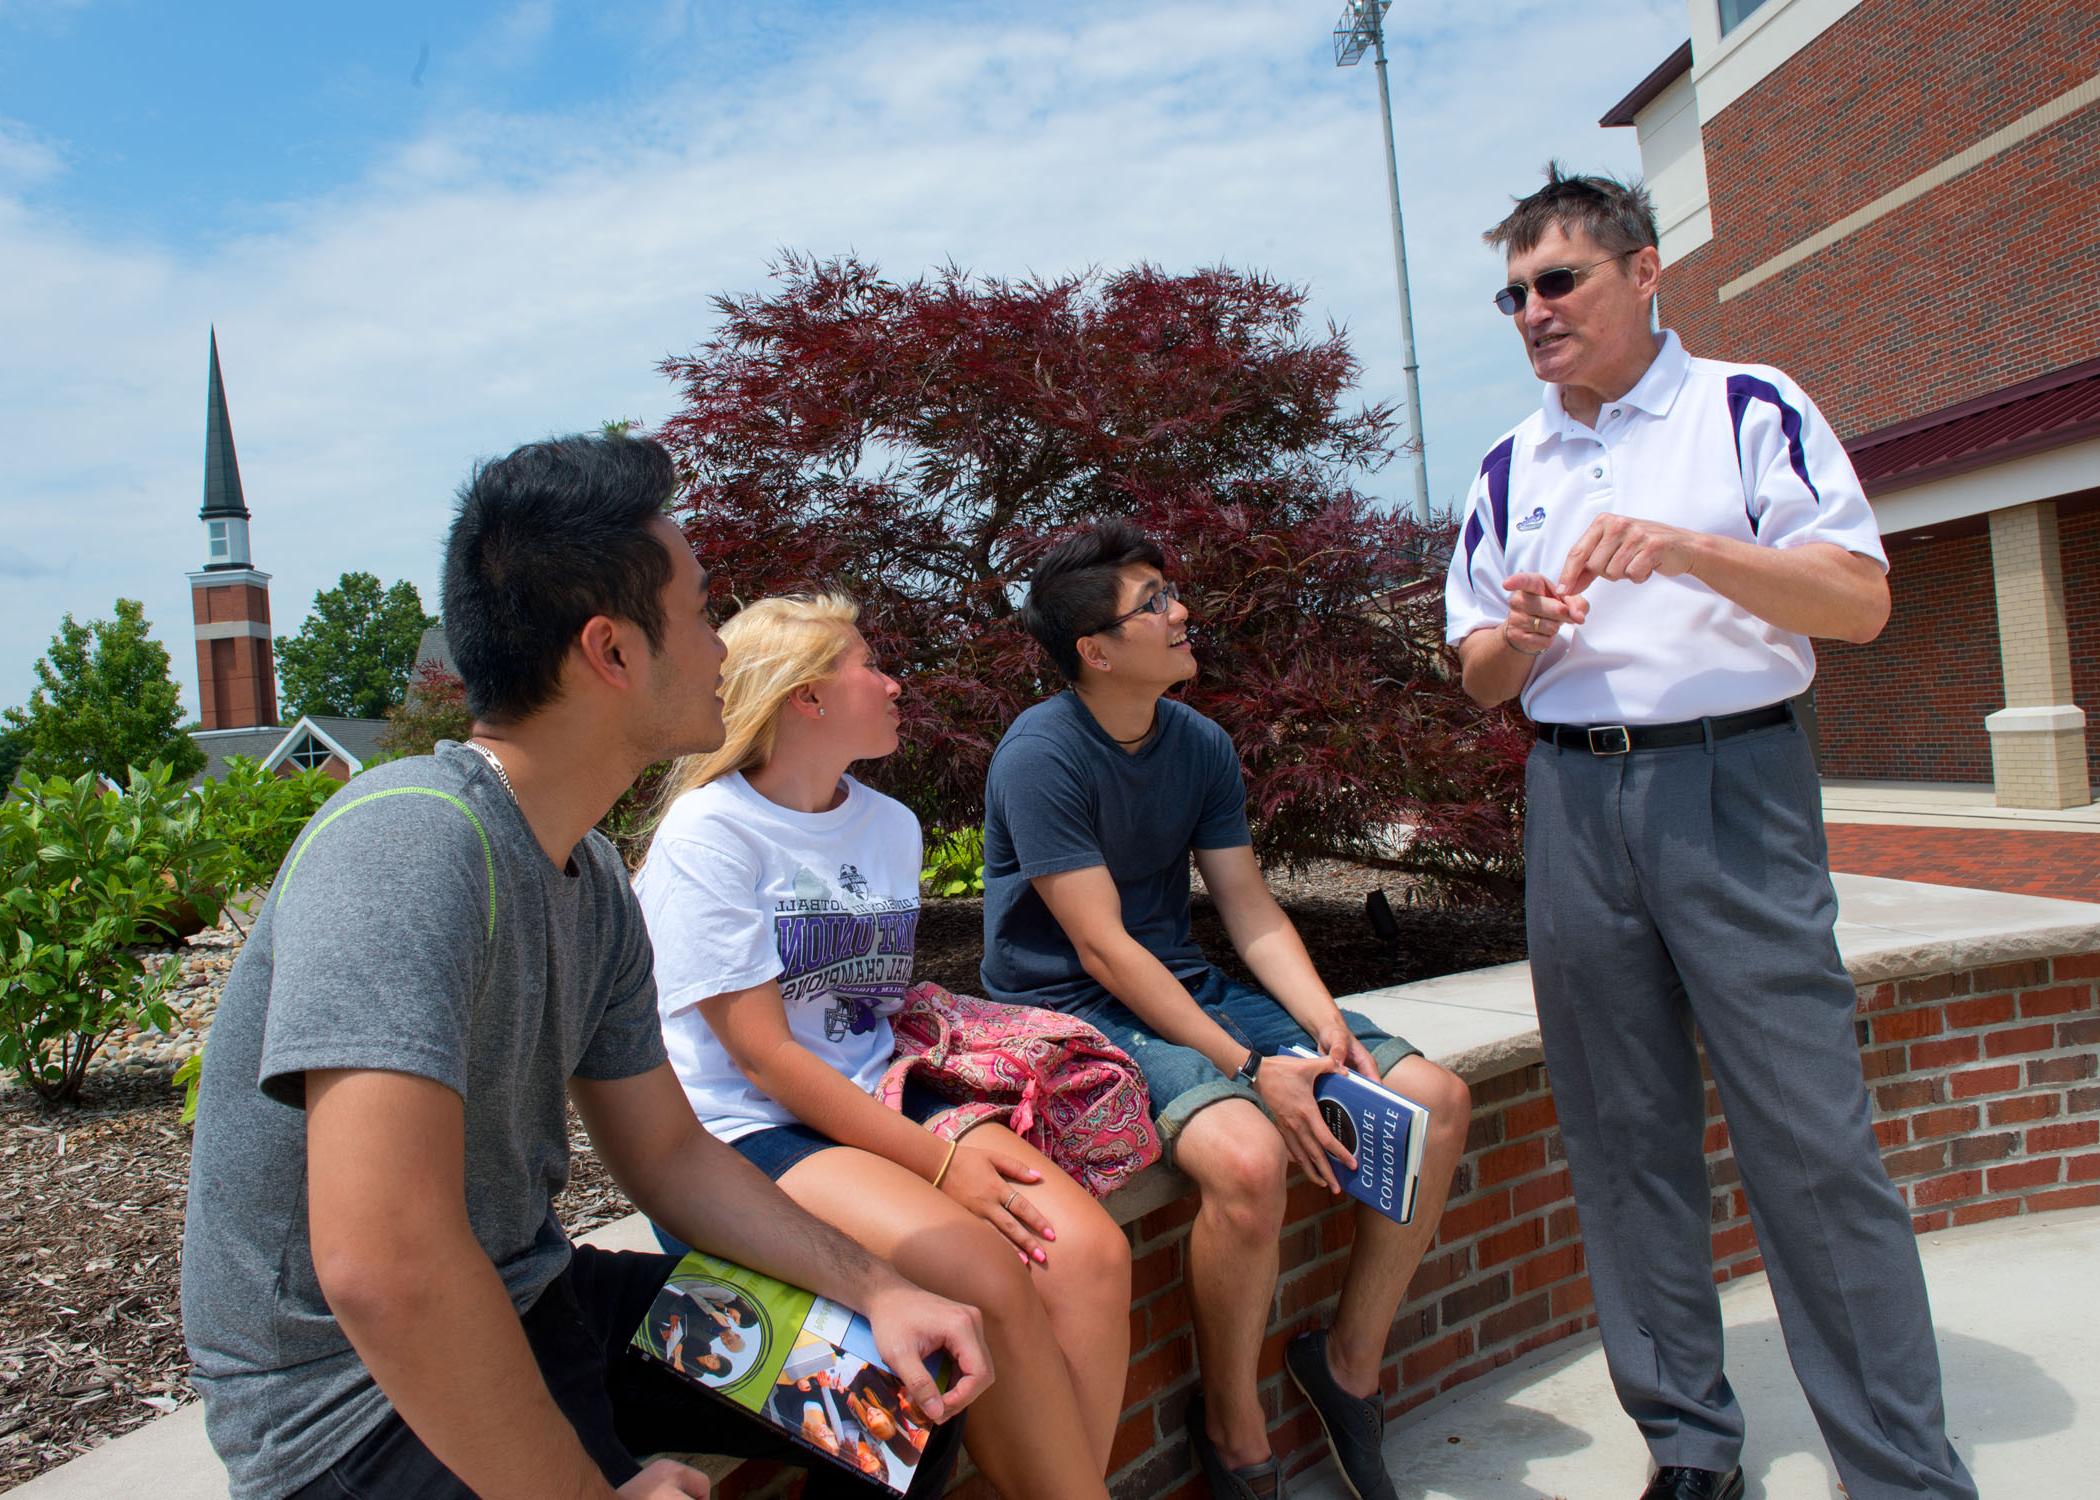 University of Mount Union students and professor gathered on campus 